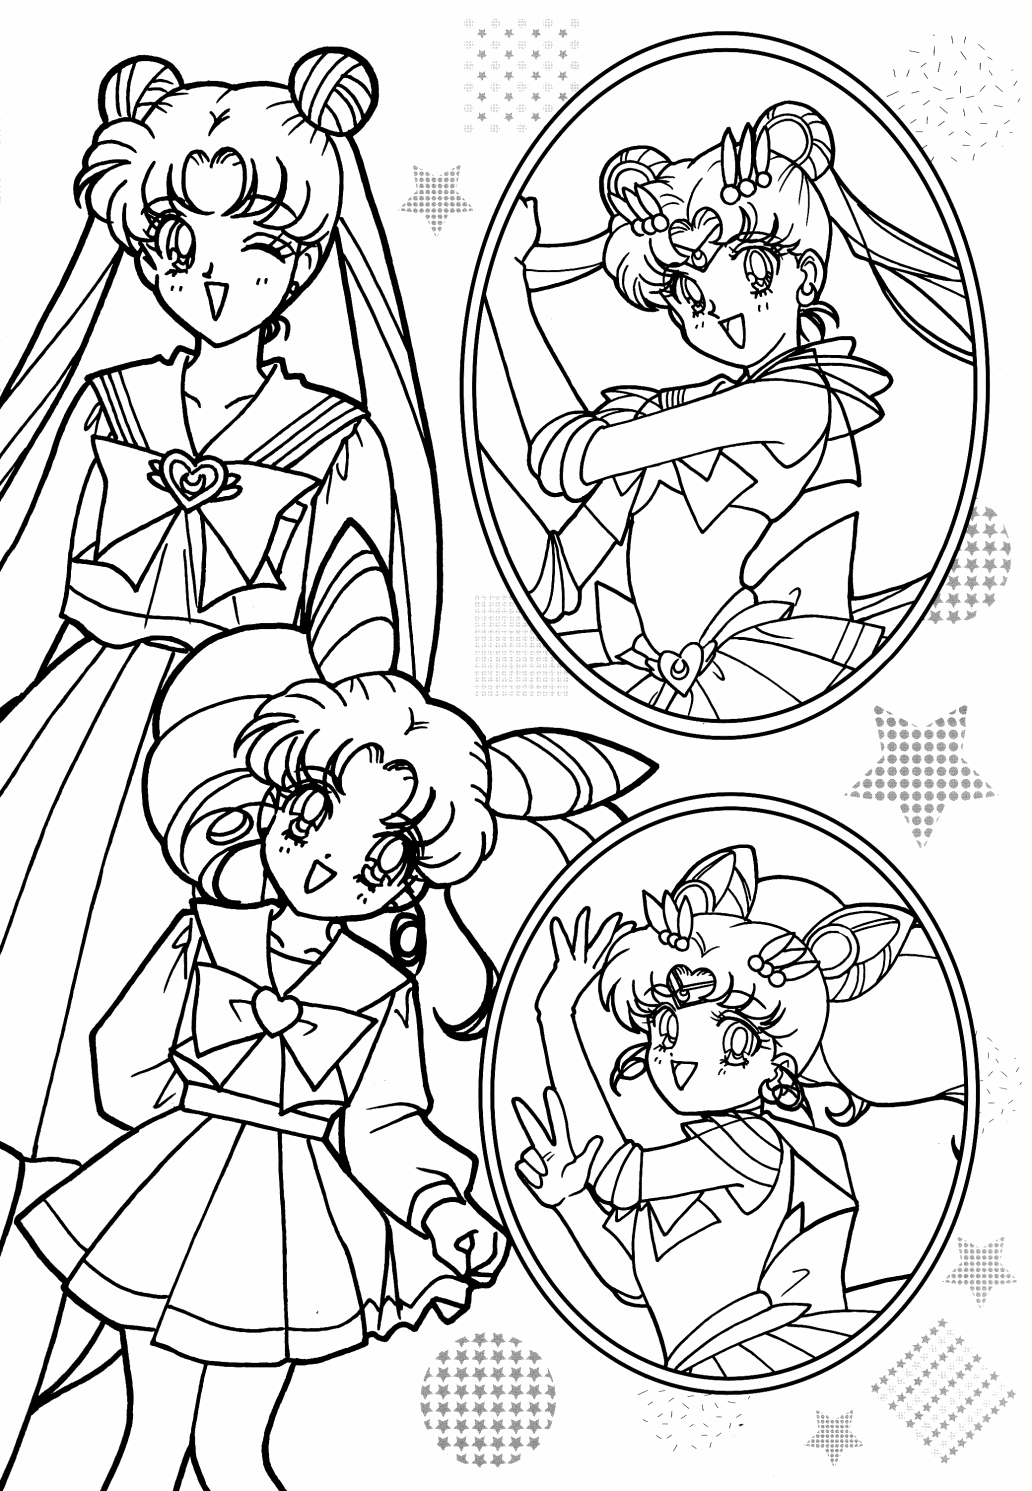 Sailor Moon Coloring Book   Coloring Pages For Kids And For Adults ...